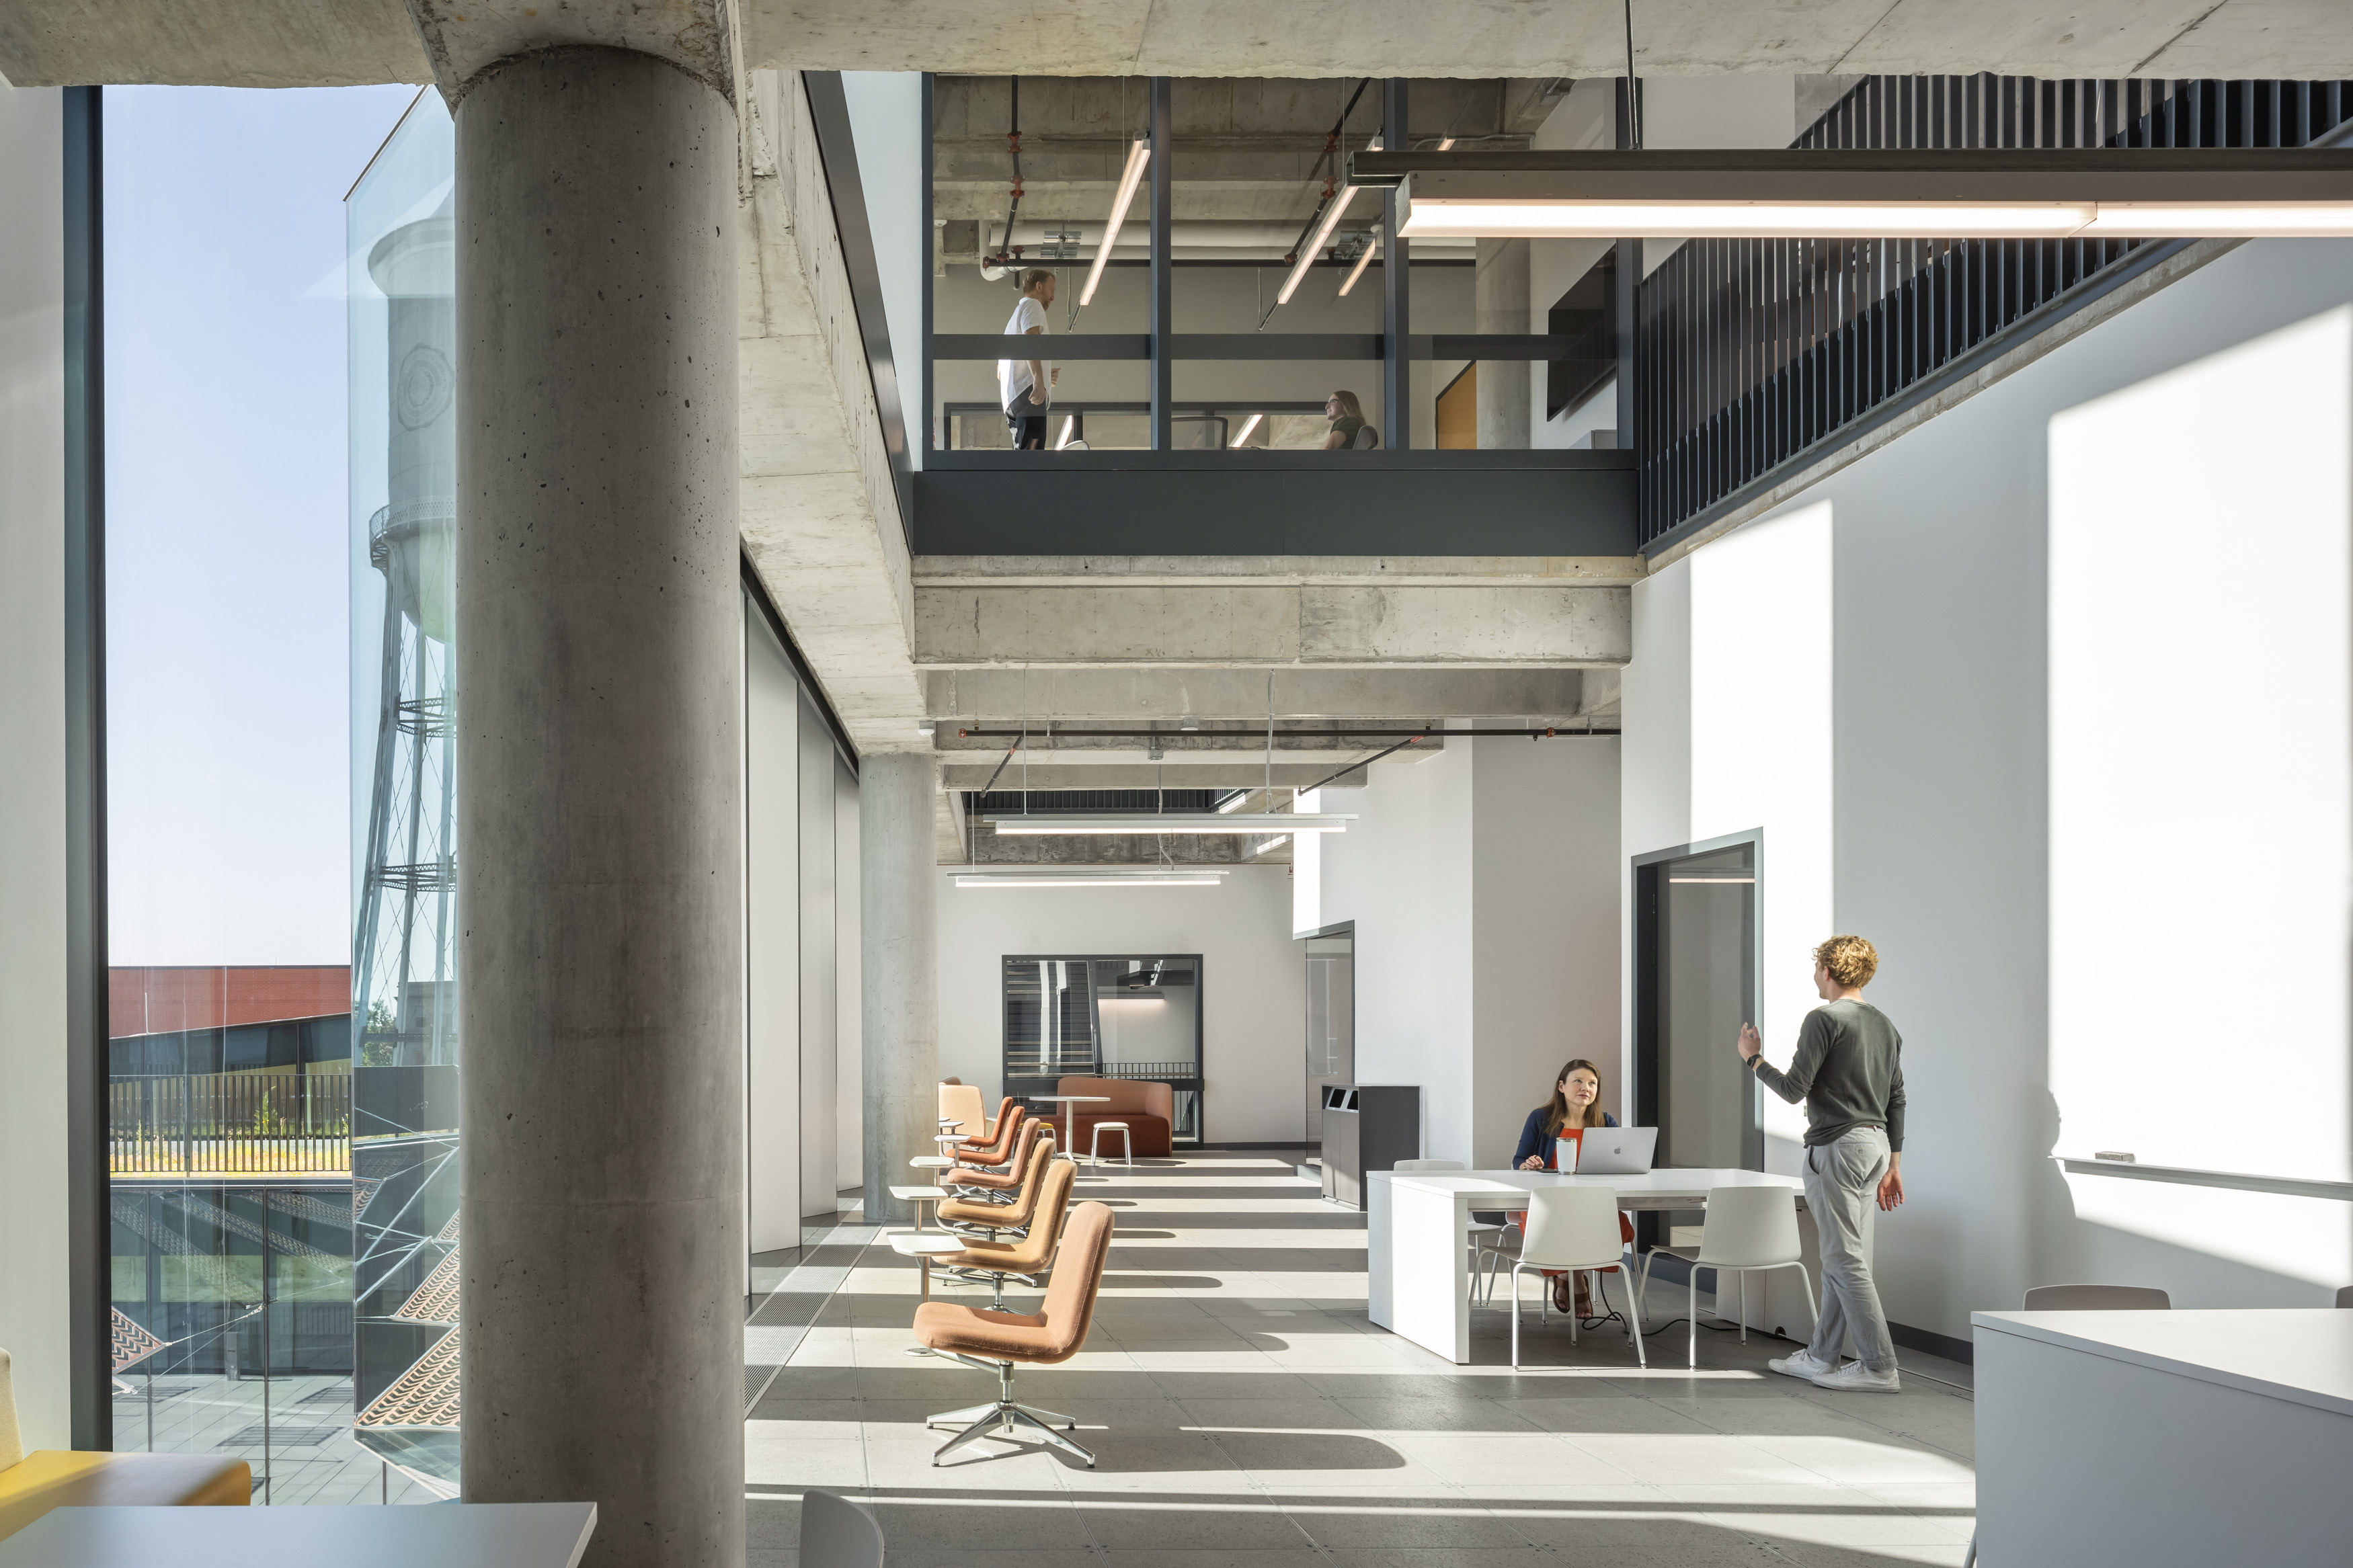 <p>Oversized corridors dotted with furniture and seating alcoves mean classes and working groups can spill into light-filled spaces to connect and collaborate. | <small>&copy; Peter Aaron/OTTO</small></p>